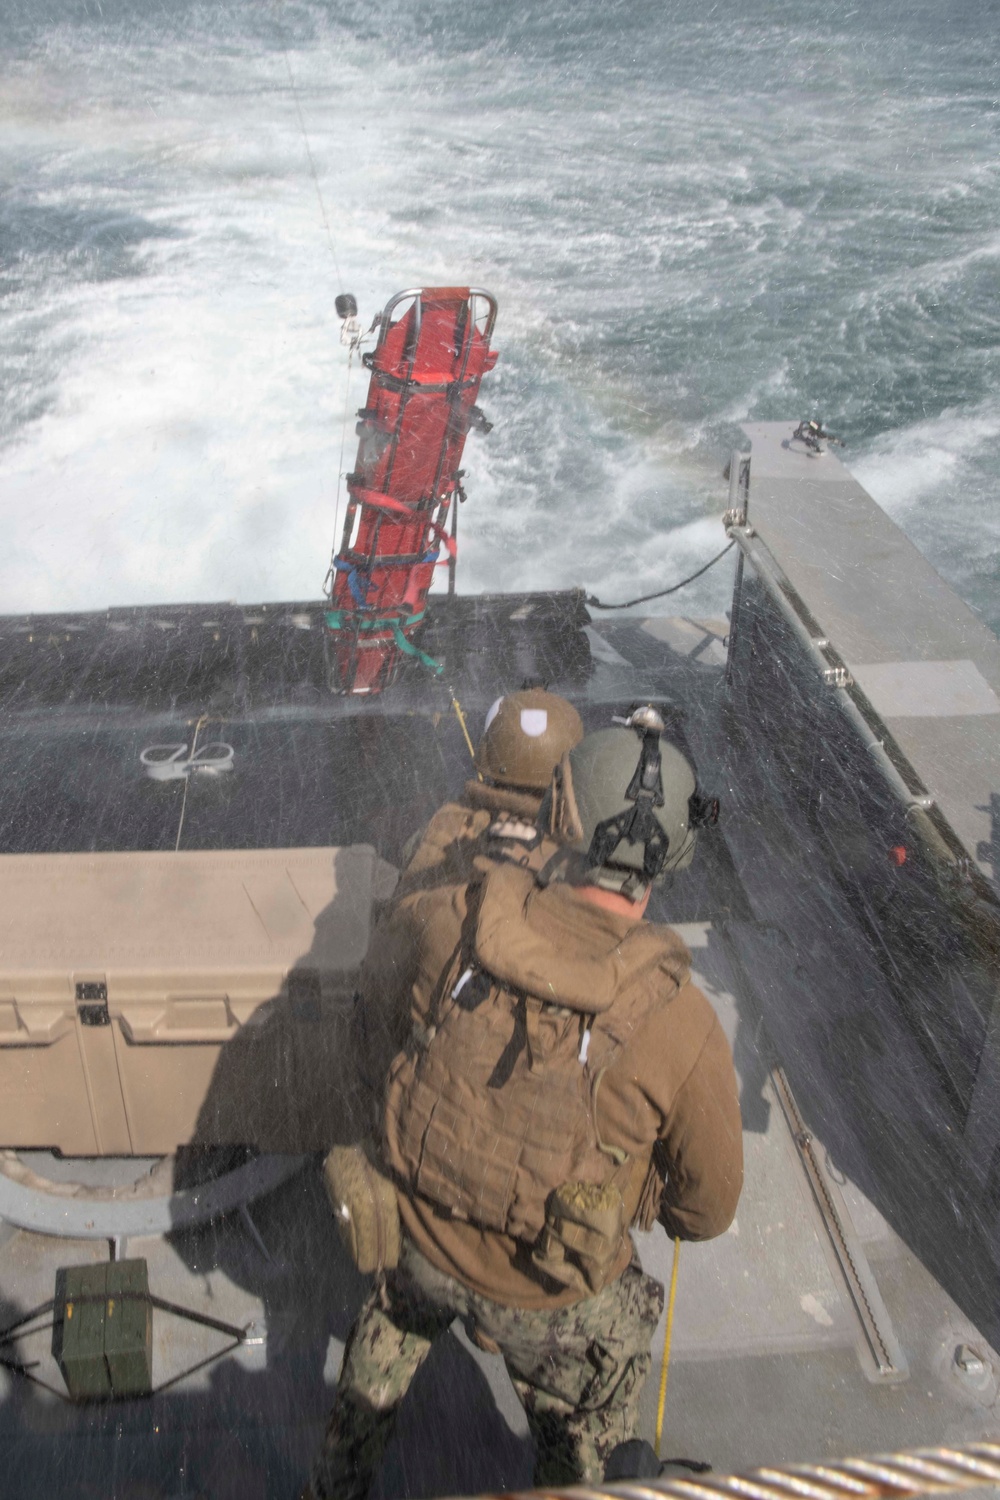 Mark VI Patrol Boats Participate in Training Exercise